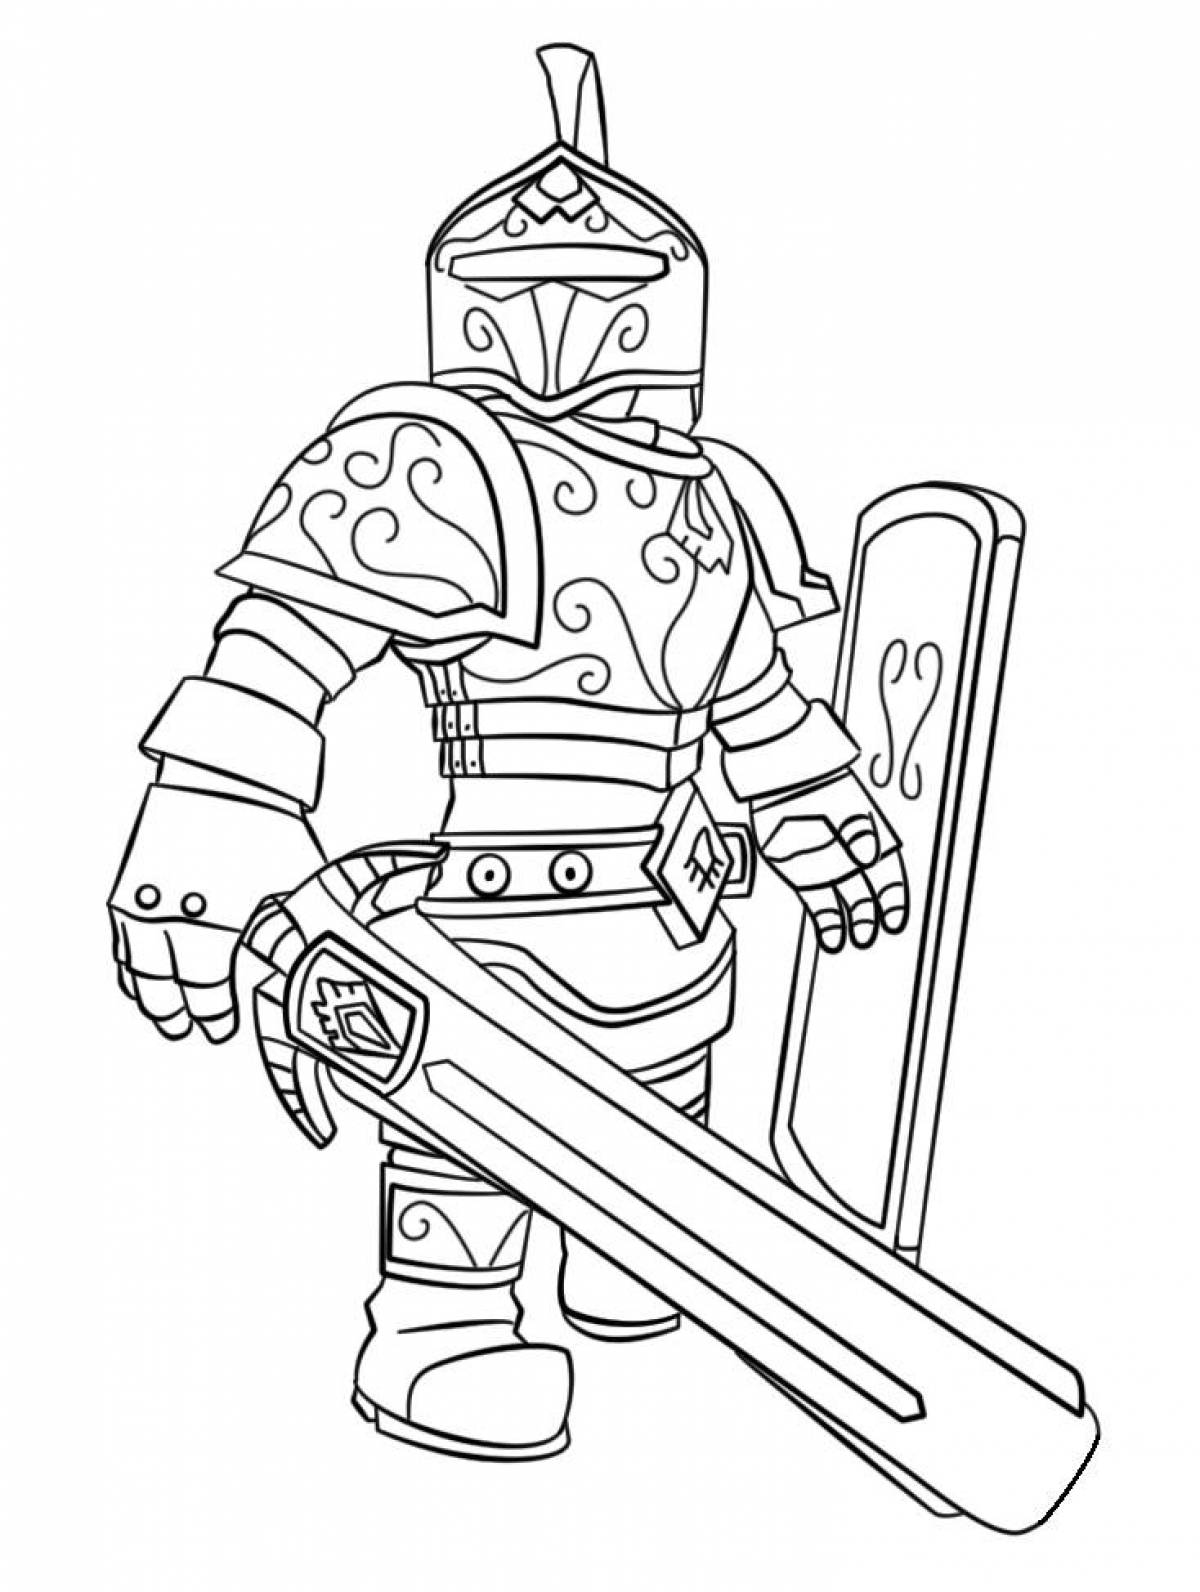 Playful roblox coloring page for boys